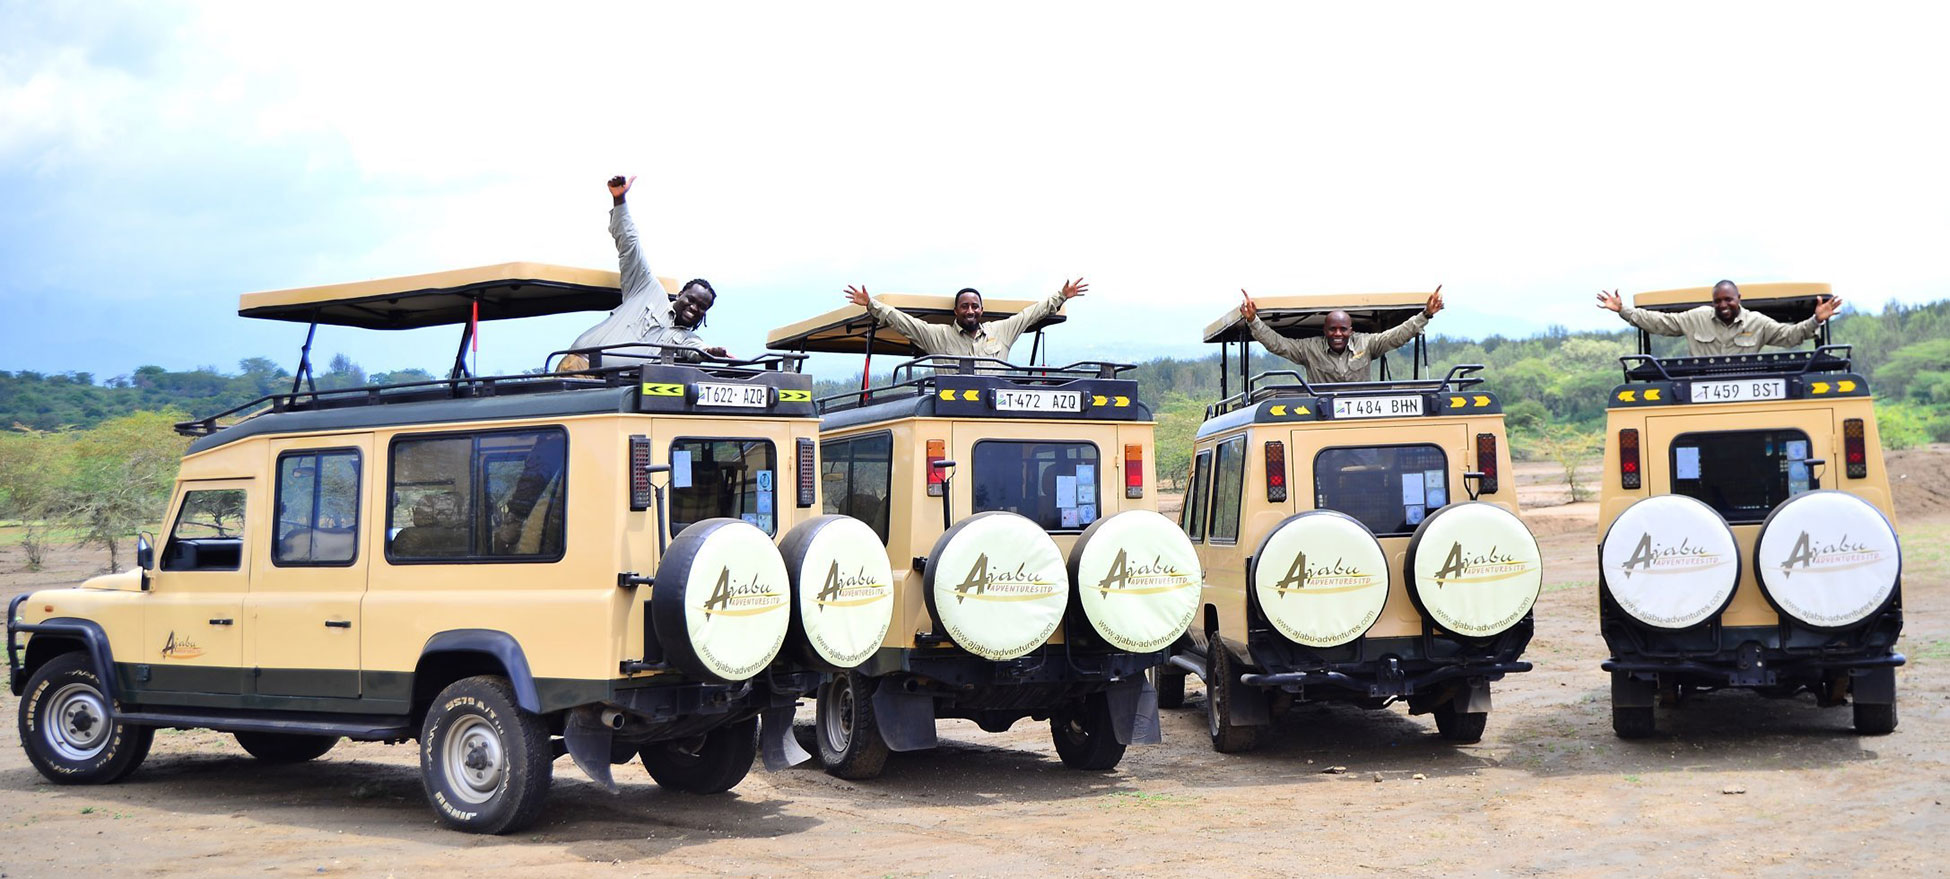 Our Ajabu Adventures safari vehicles with the local guides